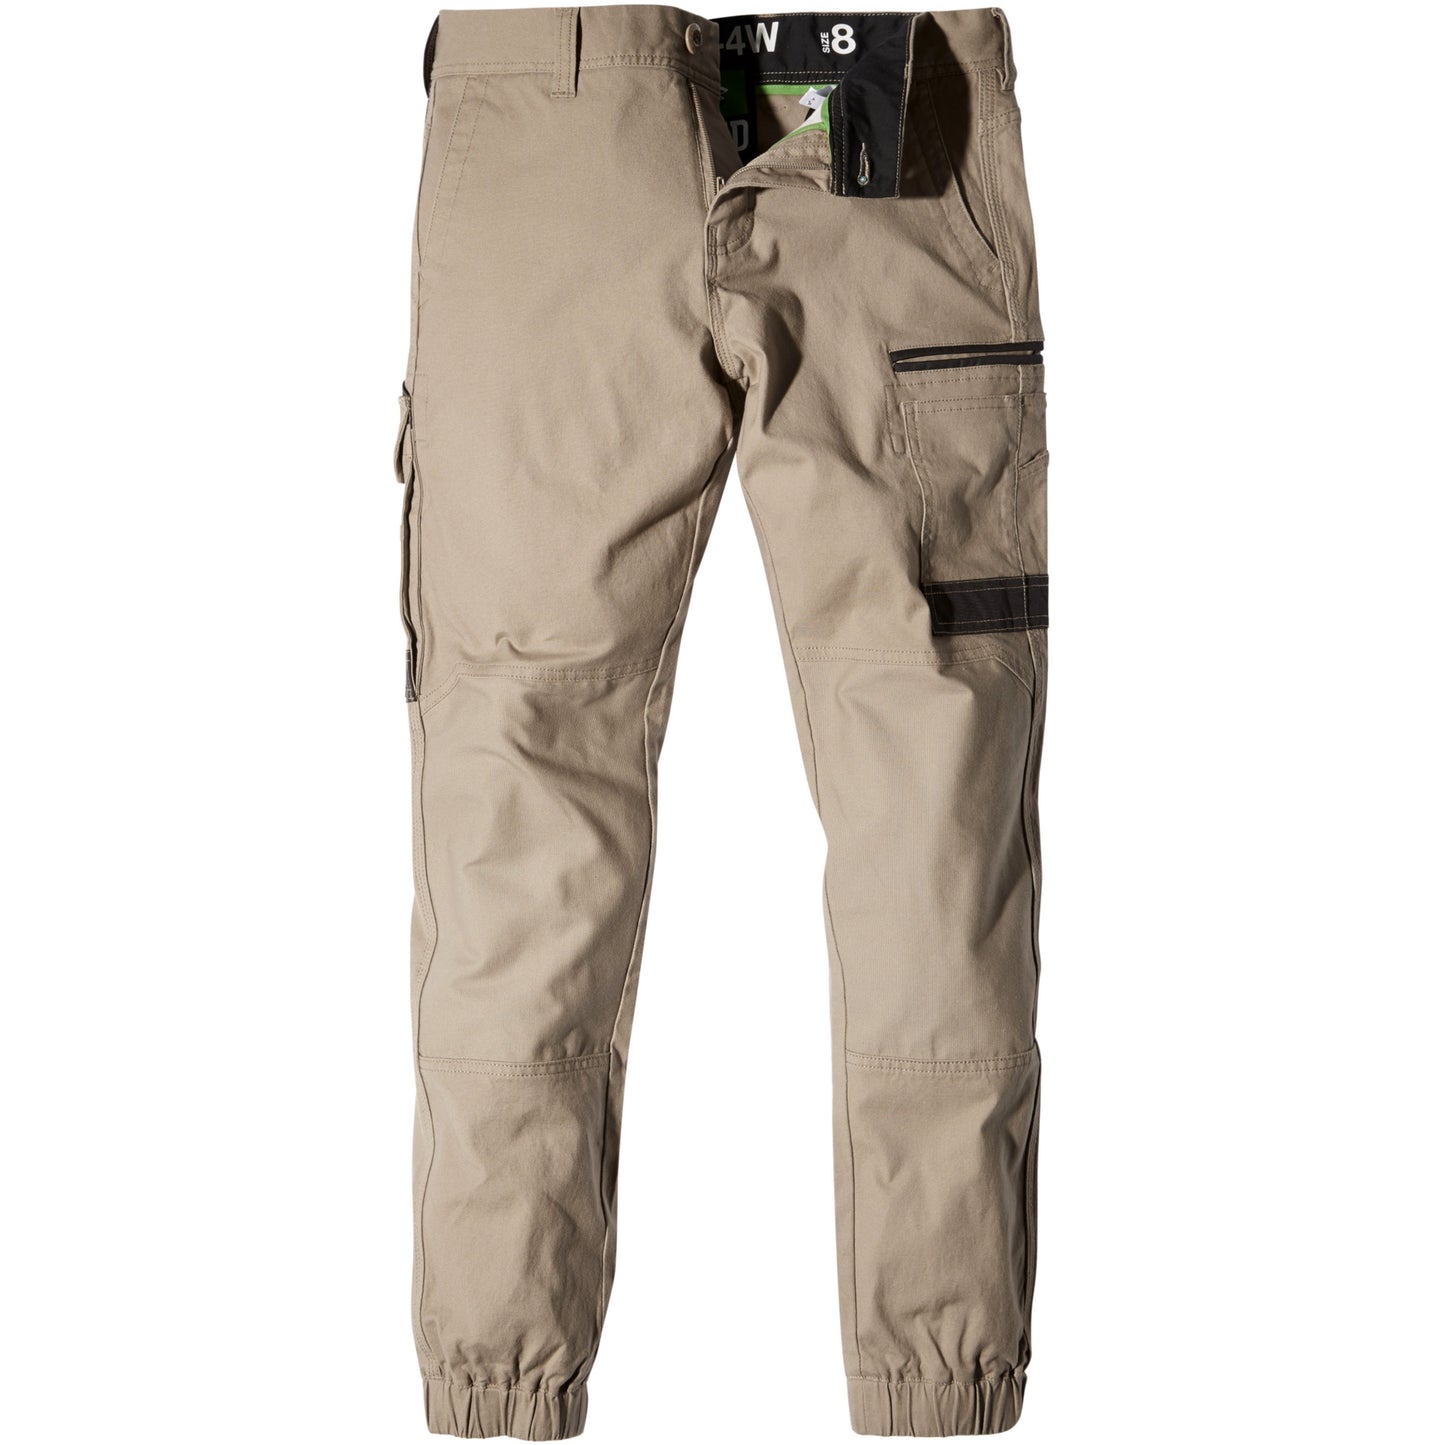 FXD WP4W Ladies Stretch Work Cargo Pants With Cuff